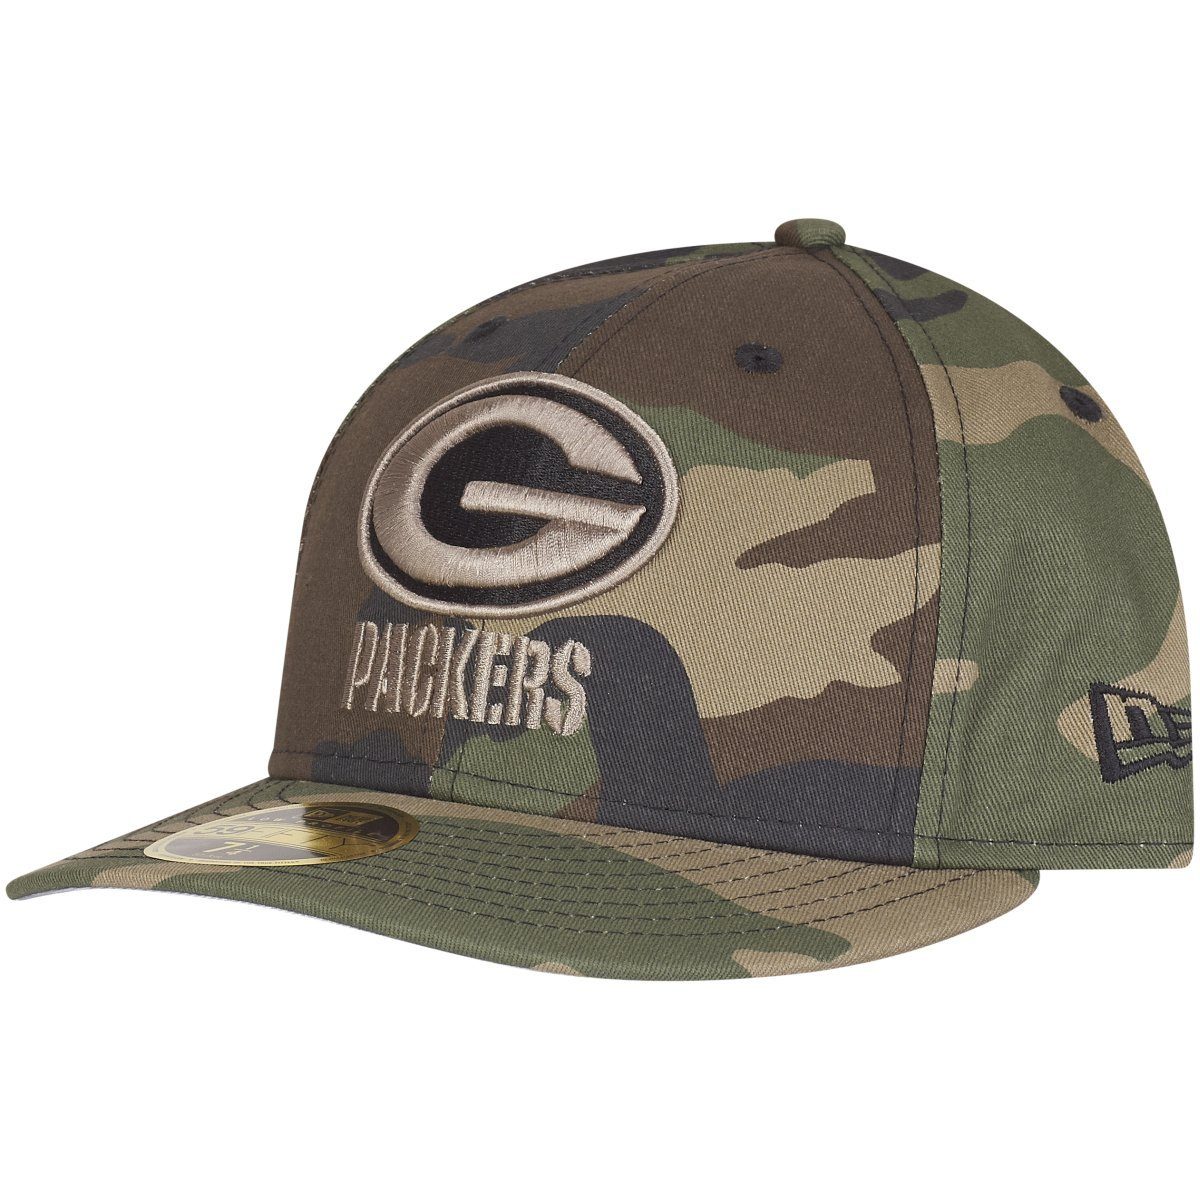 New Era Fitted Cap Low Green NFL Teams Packers Bay woodland 59Fifty Profile